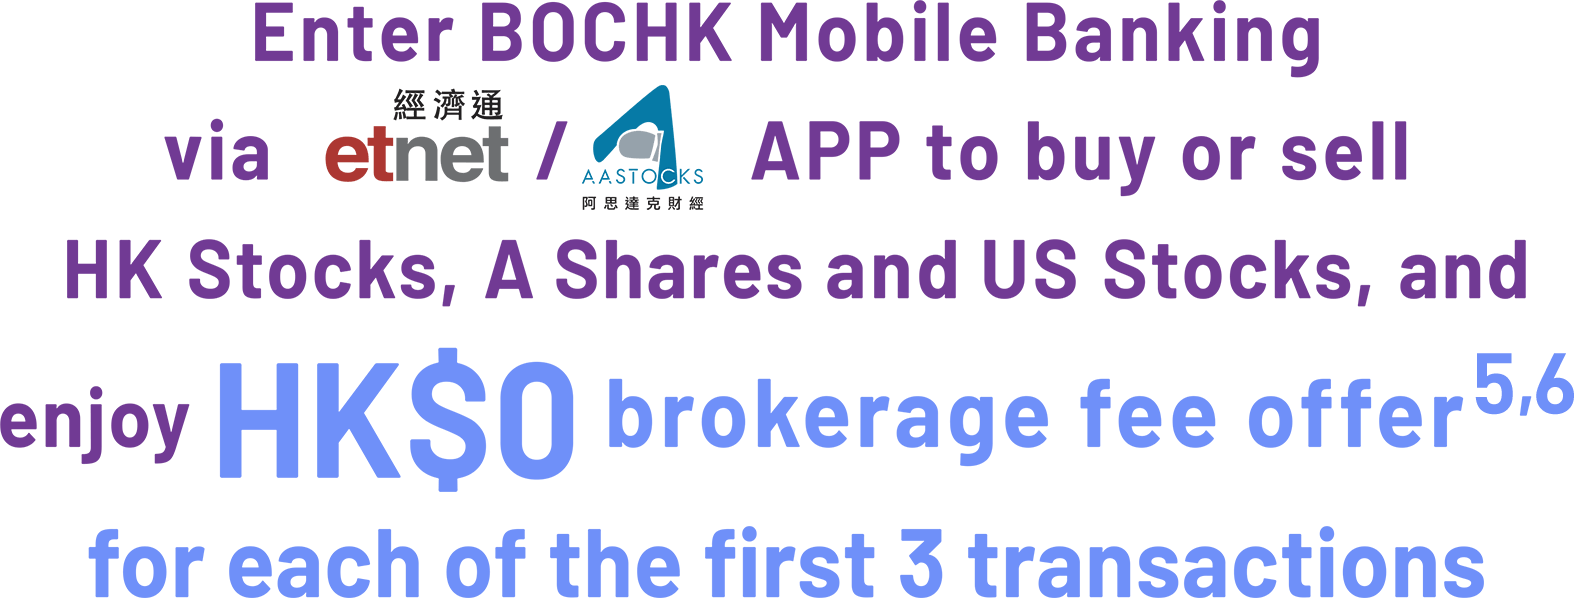 Enter BOCHK Mobile Banking via ETNET/AASTOCKS APP to buy or sell HK Stocks, A Shares and US Stocks, and enjoy HK$0 brokerage fee offer for each of the first 3 transactions